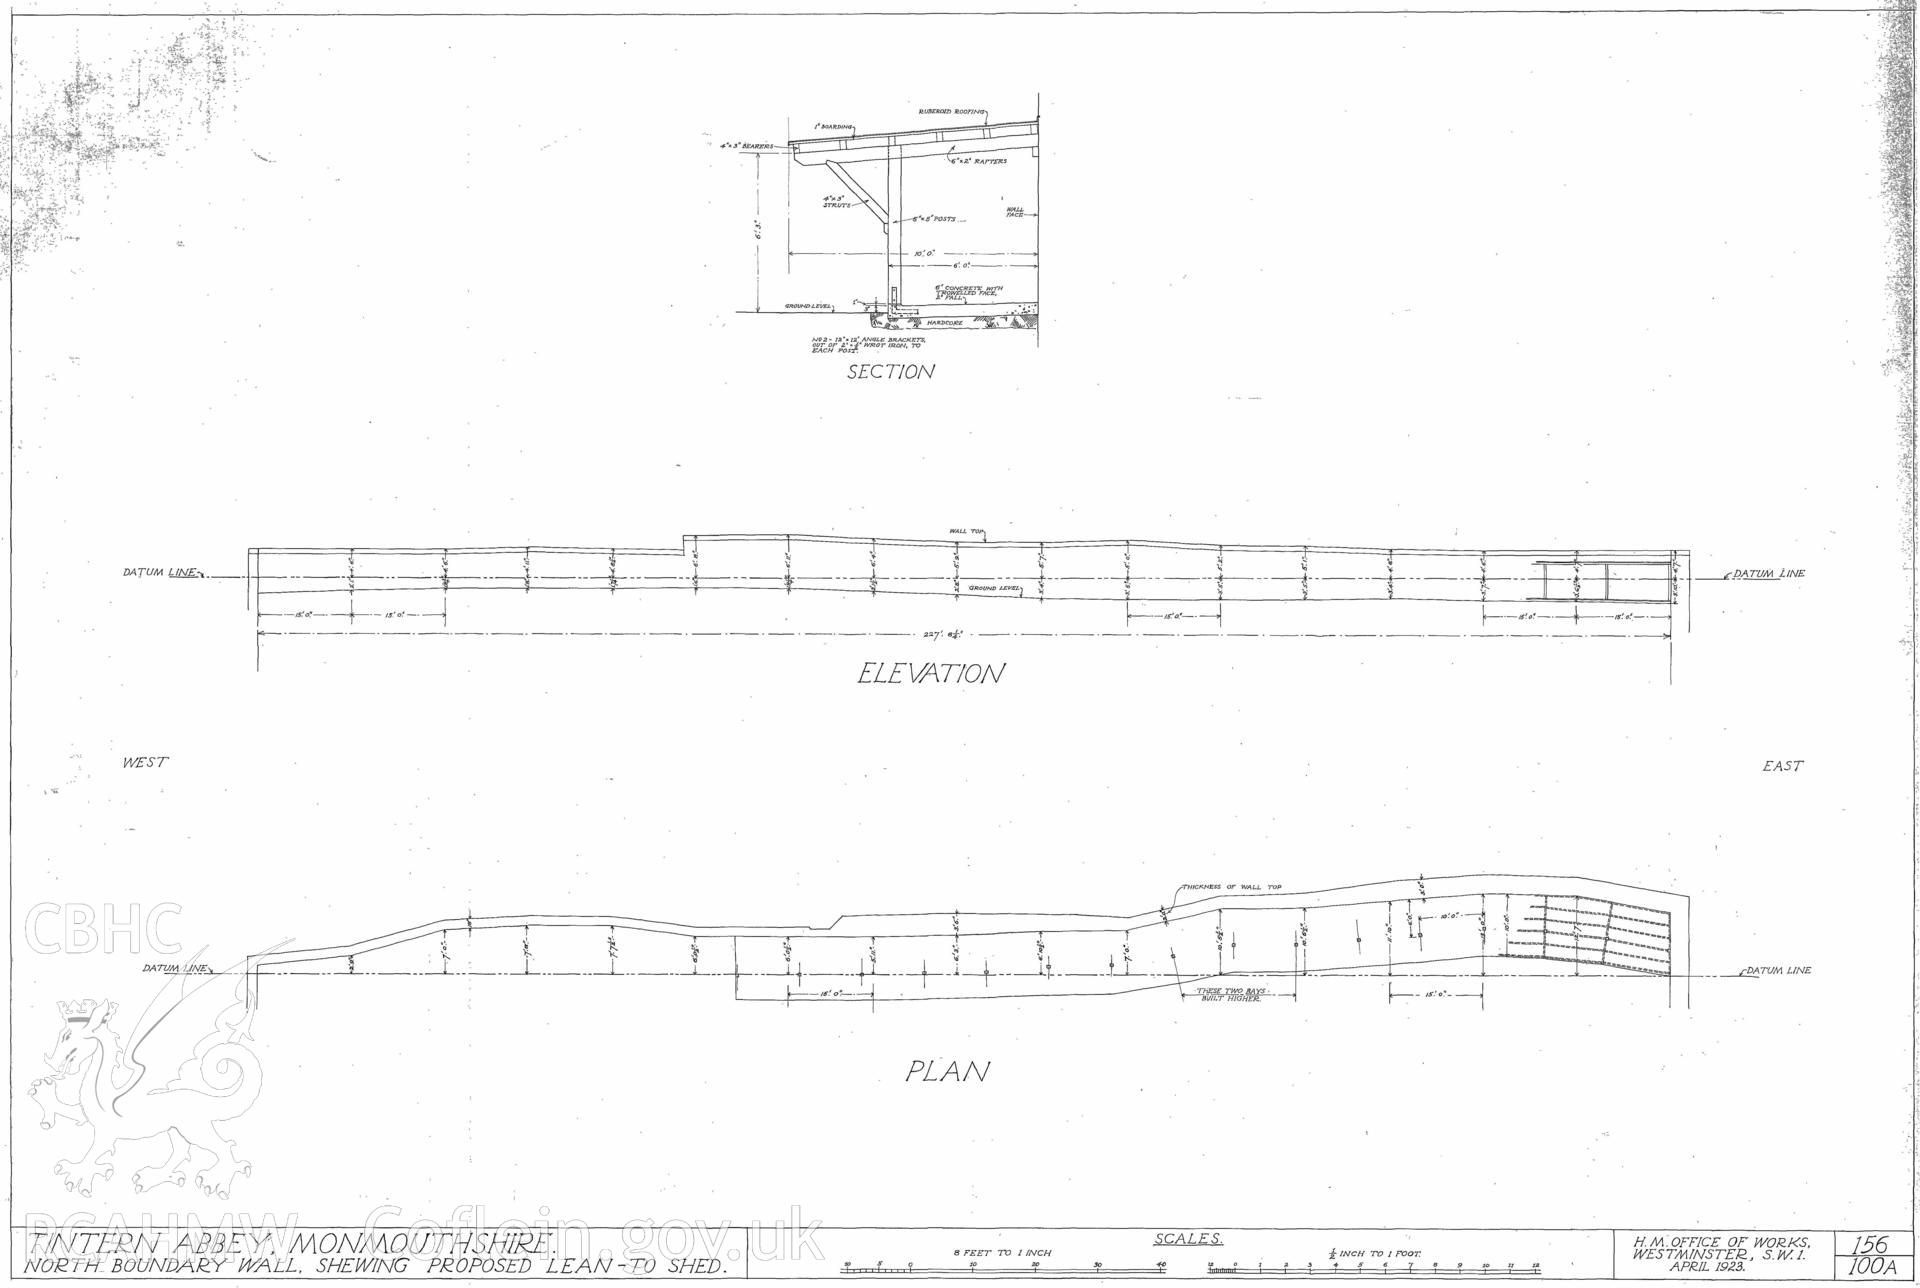 Cadw guardianship monument drawing of Tintern Abbey. N Boundary Wall Lean-to shed. Cadw ref. No. 156/100A. Scale 1:96:24.